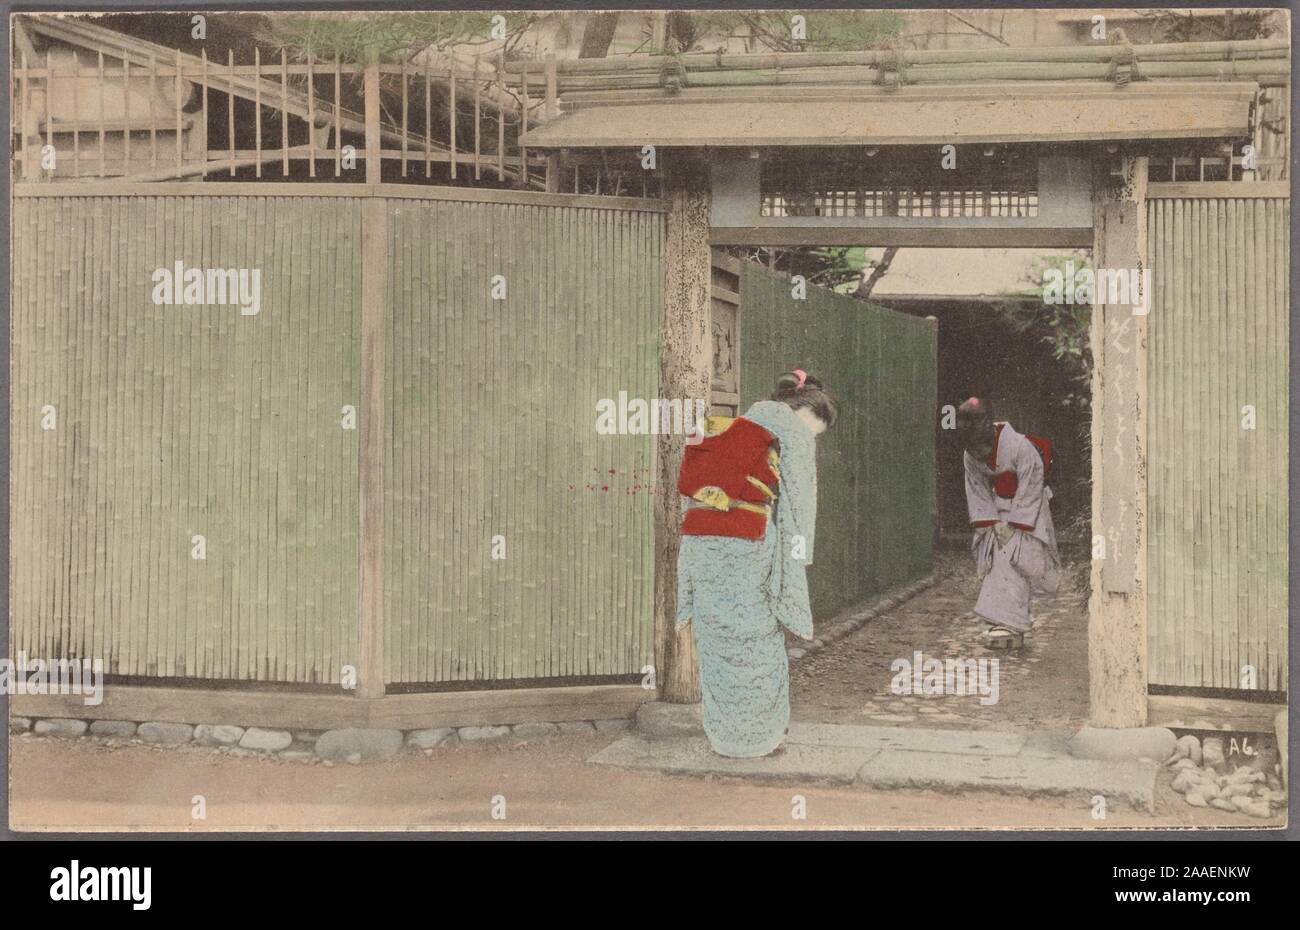 Illustrated postcard featuring two Japanese women wearing traditional kimono, standing in an entryway between two bamboo fences bowing to each other, Japan, 1920. From the New York Public Library. () Stock Photo